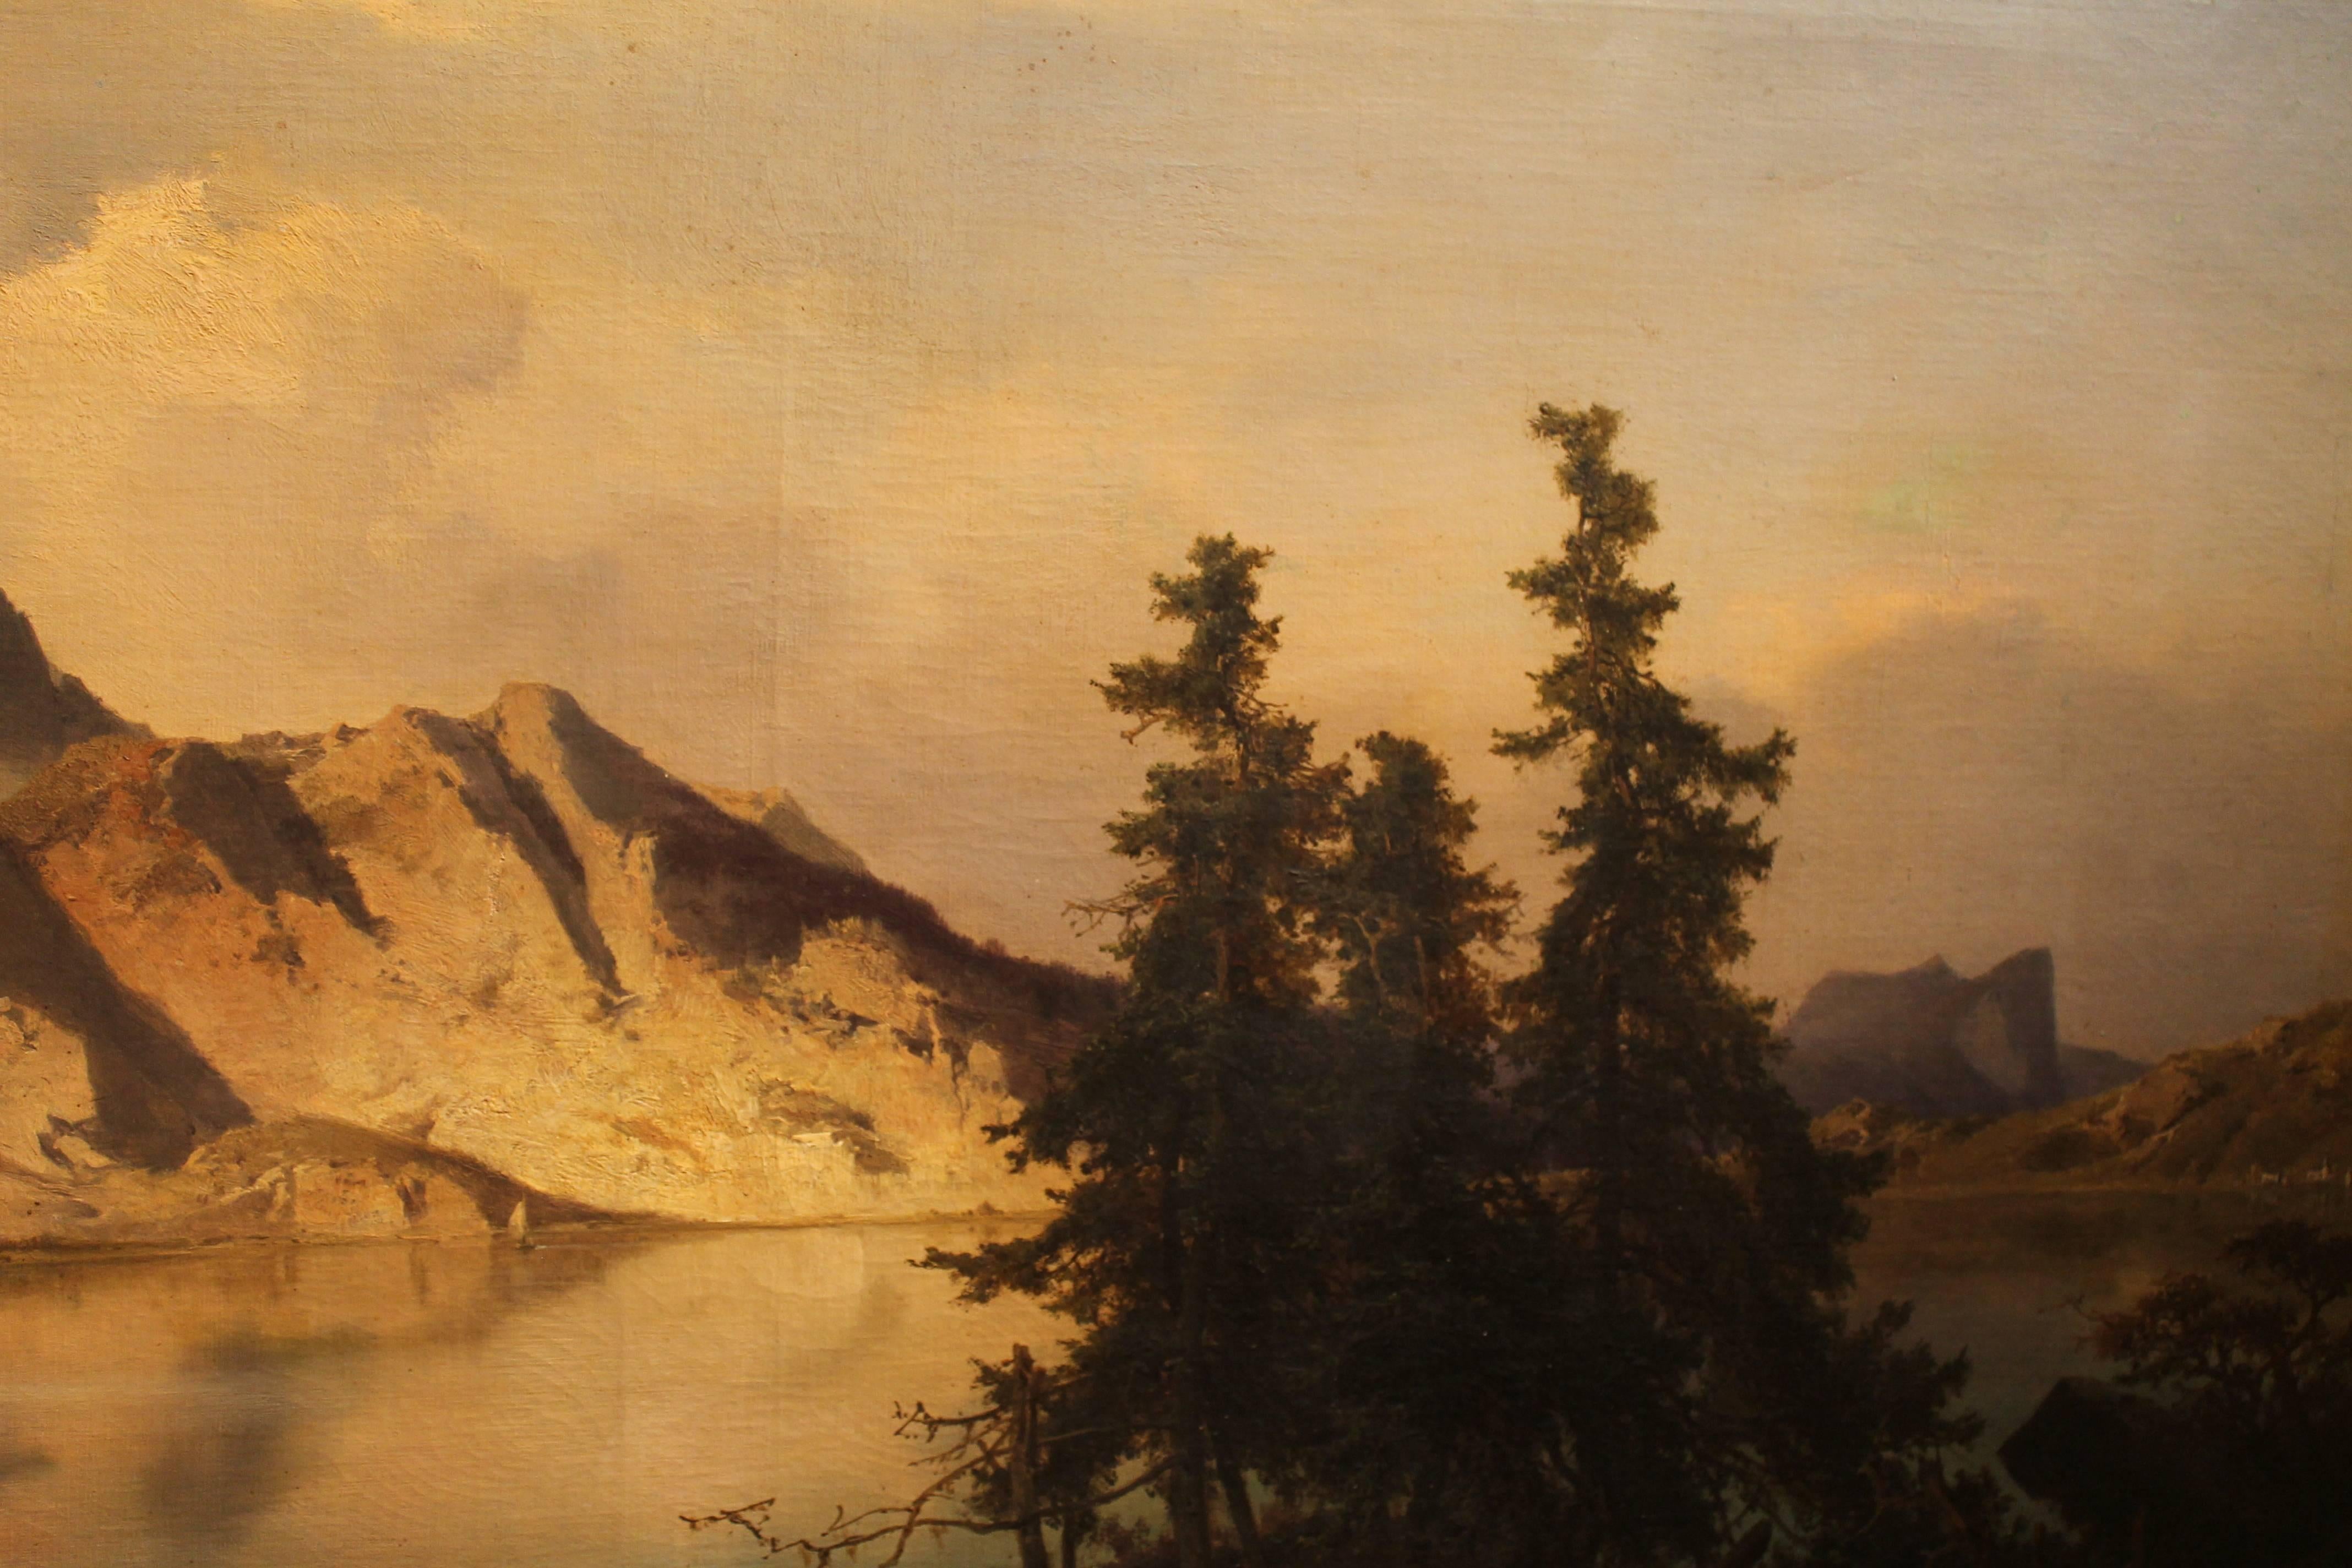 This very fine quality 19th century oil on canvas in dark brown wood frame with gold leaves details throughout is signed by Joseph Brunner (Vienna 1826-1893) and was painted in 1869. This oil painting bucolic landscape depicts the Attersee, a lake